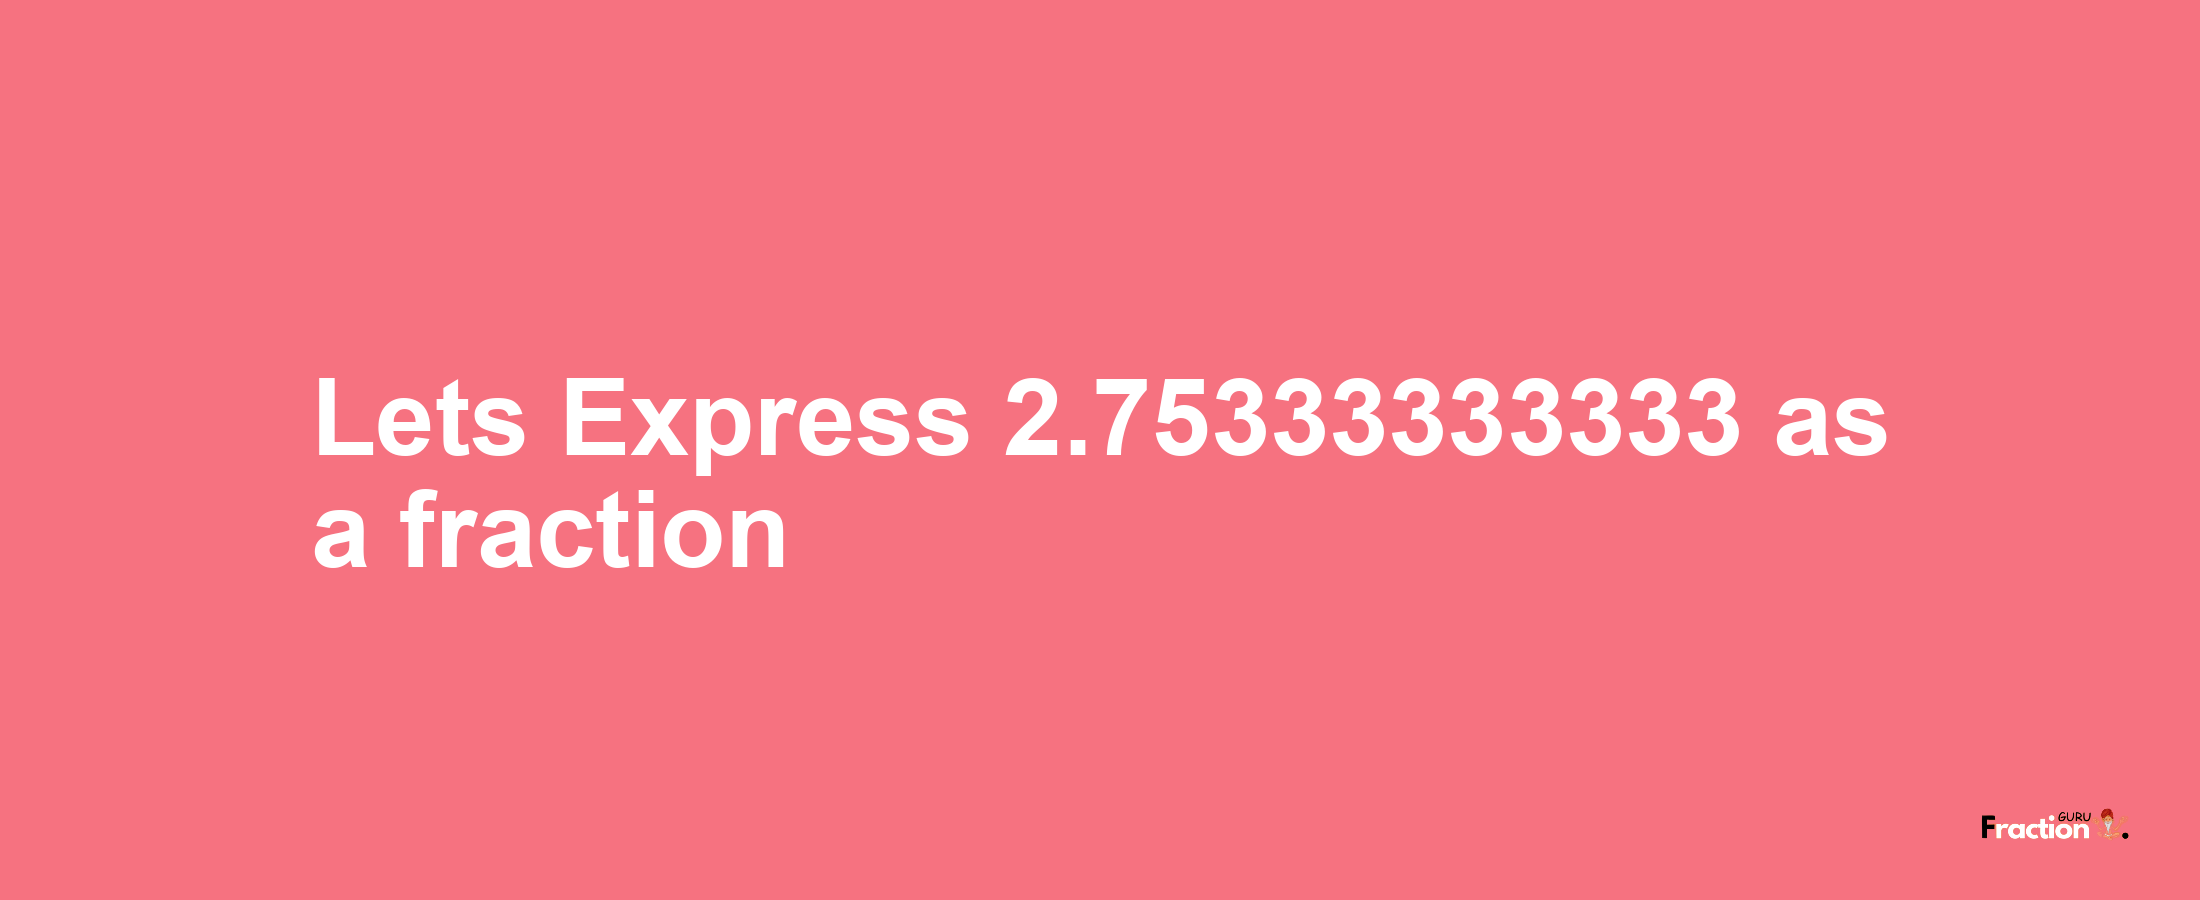 Lets Express 2.75333333333 as afraction